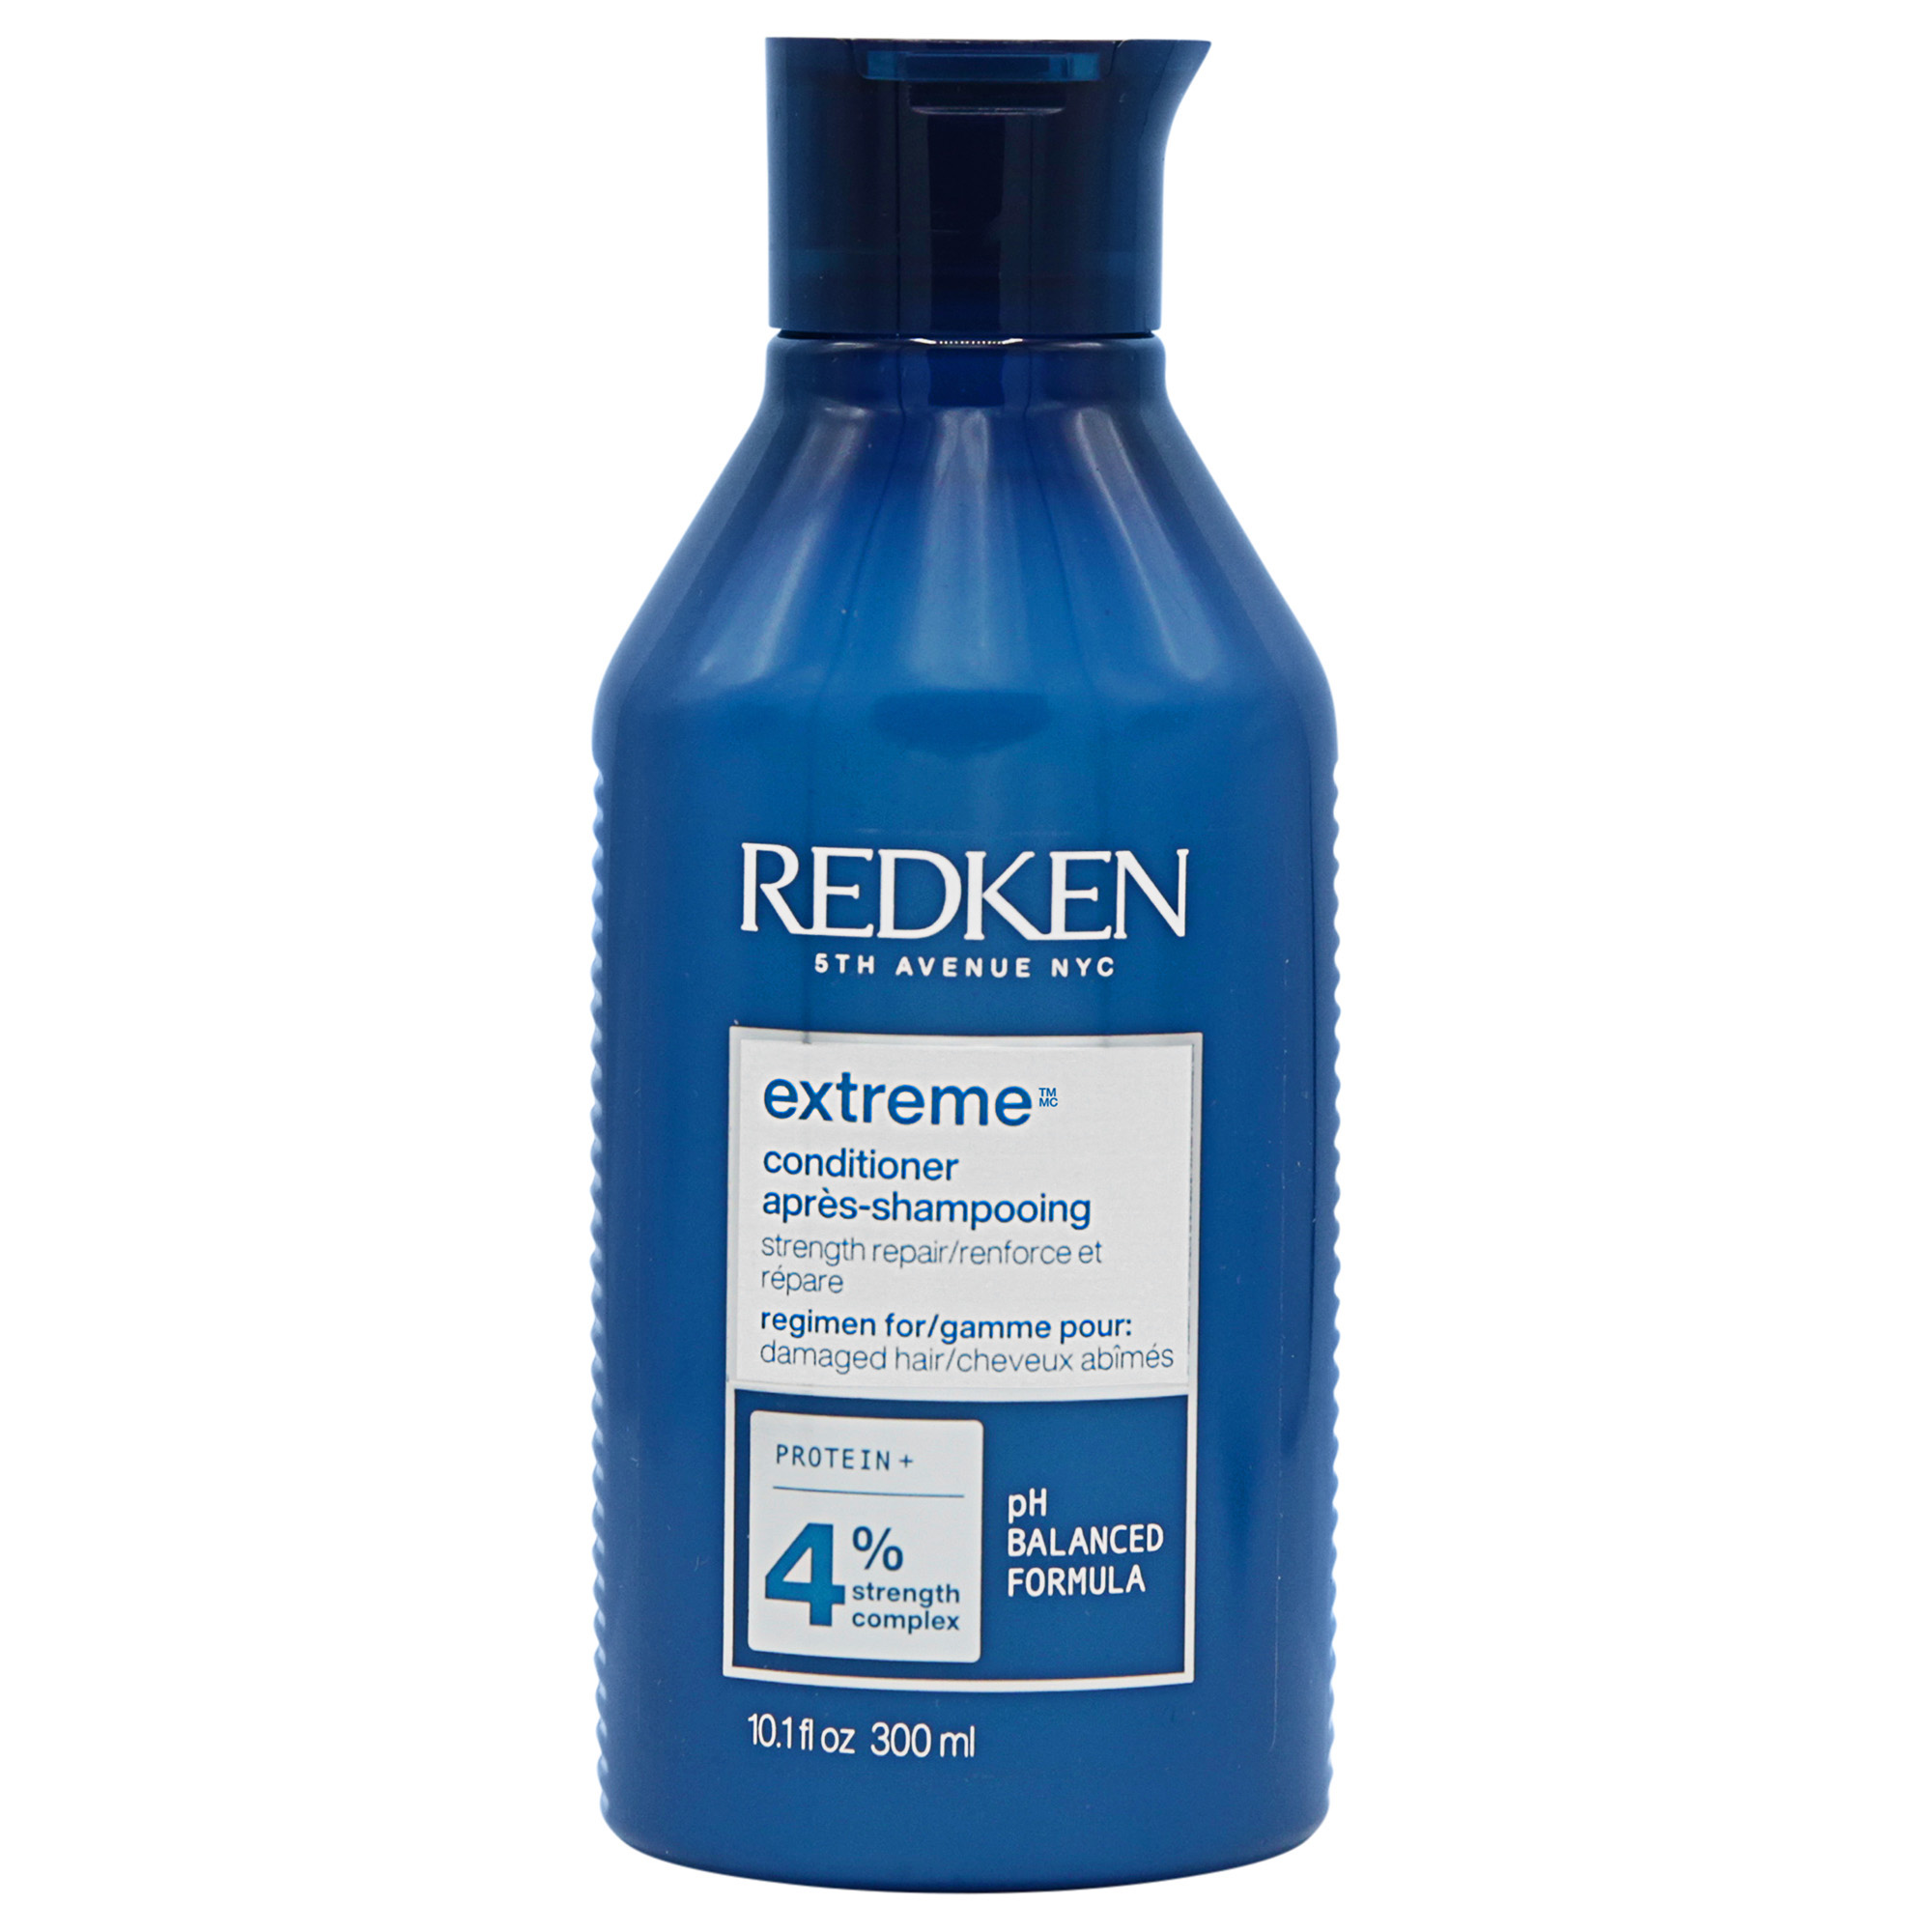 RKN-Extreme-Conditioner-300ml